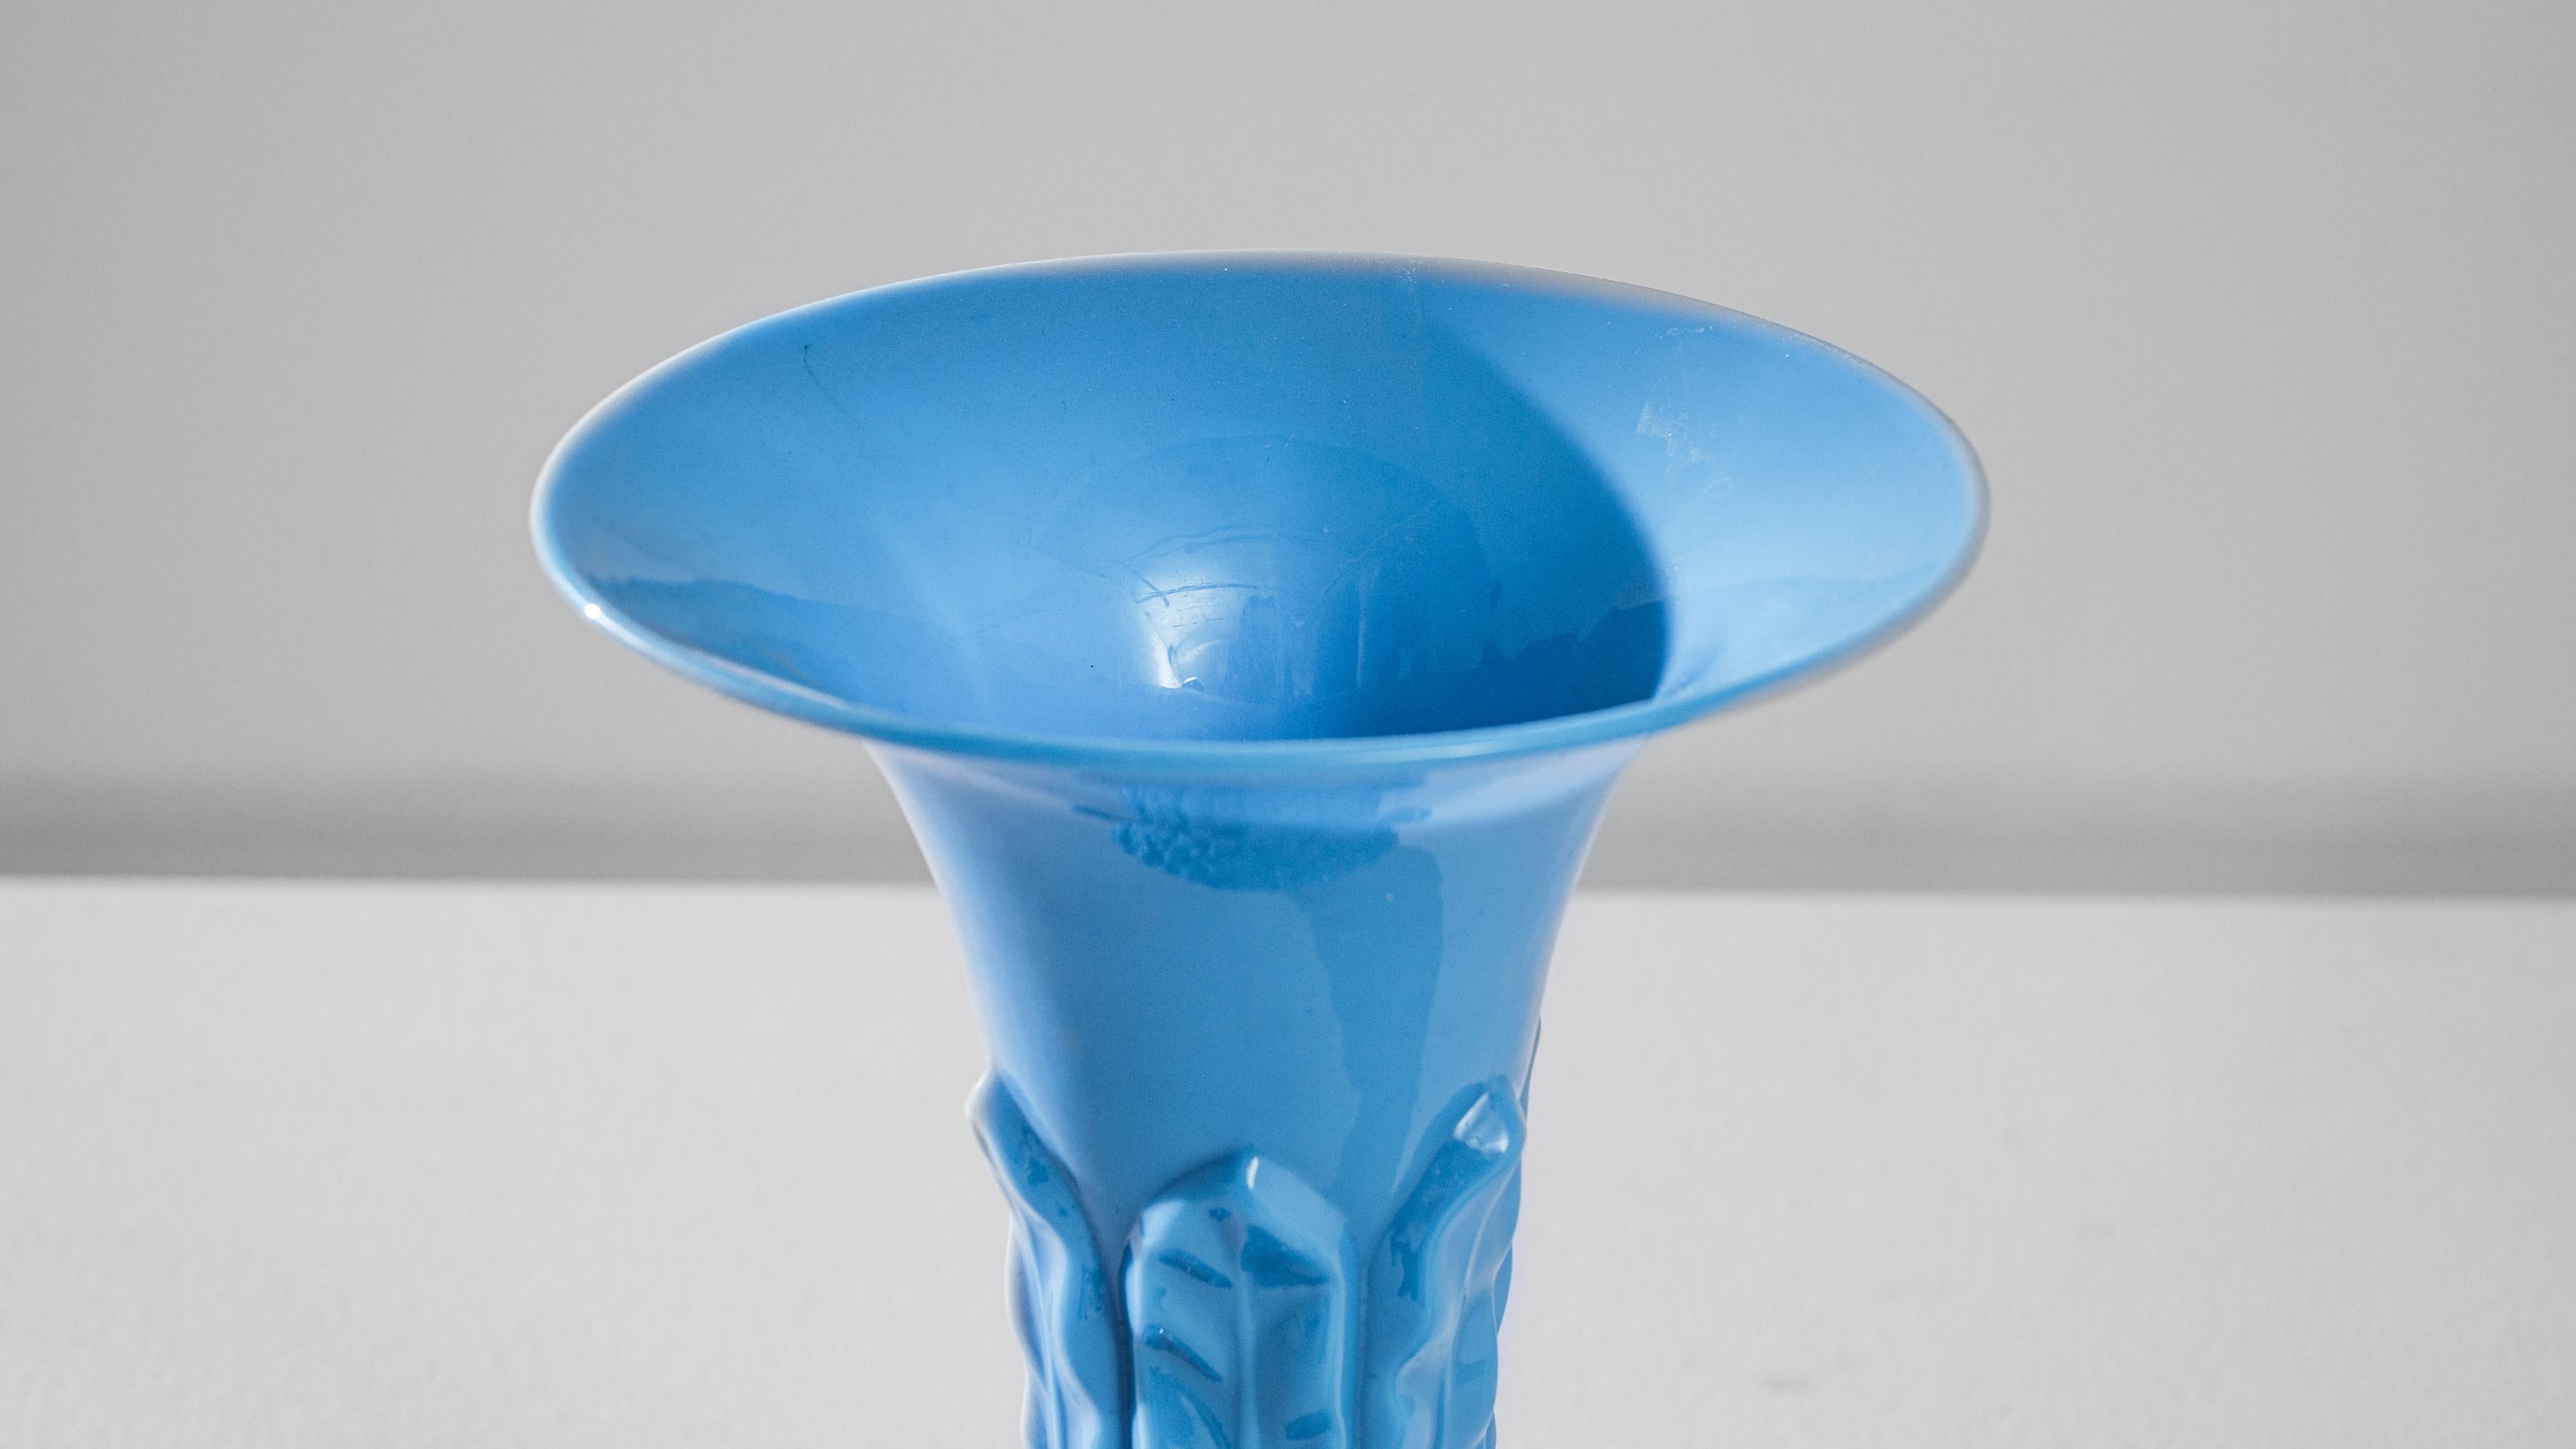 This captivating 1960s Italian blue glass vase is a stunning representation of artistry and craftsmanship from the era. With its vivid sky-blue color and unique texture, the vase has a striking presence that commands attention. The lower half boasts